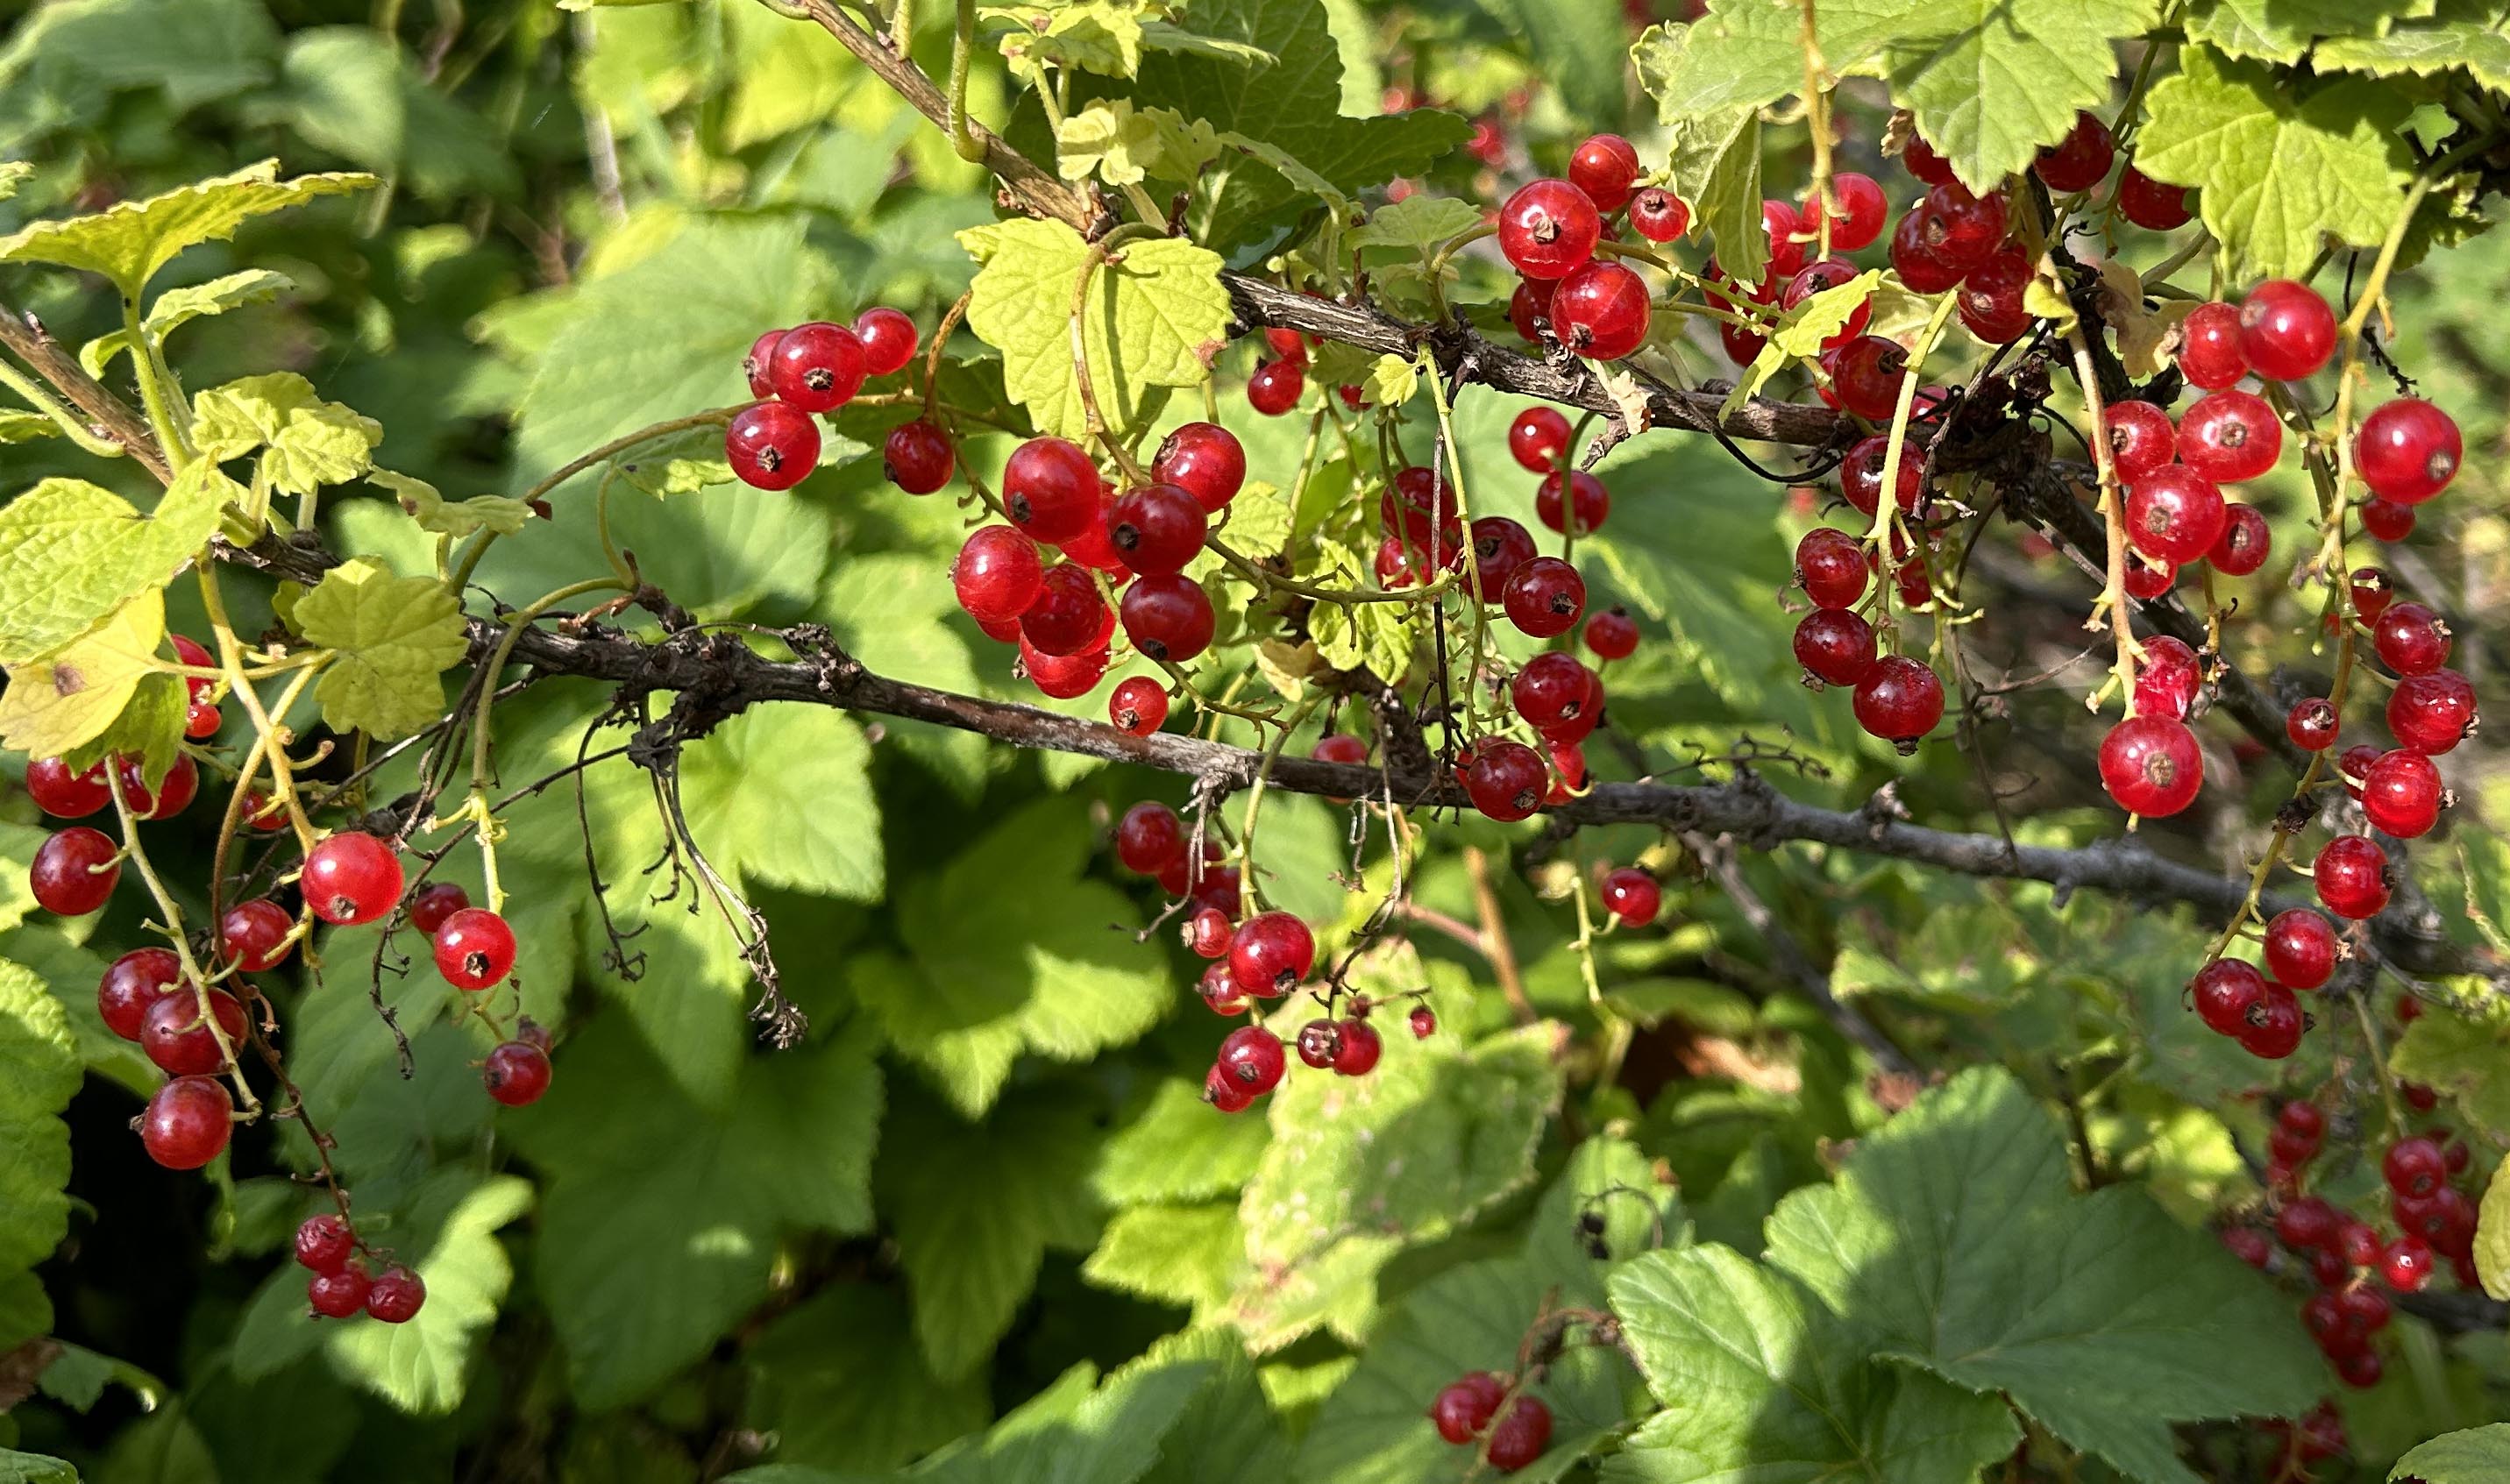 Red currant berries on the plant